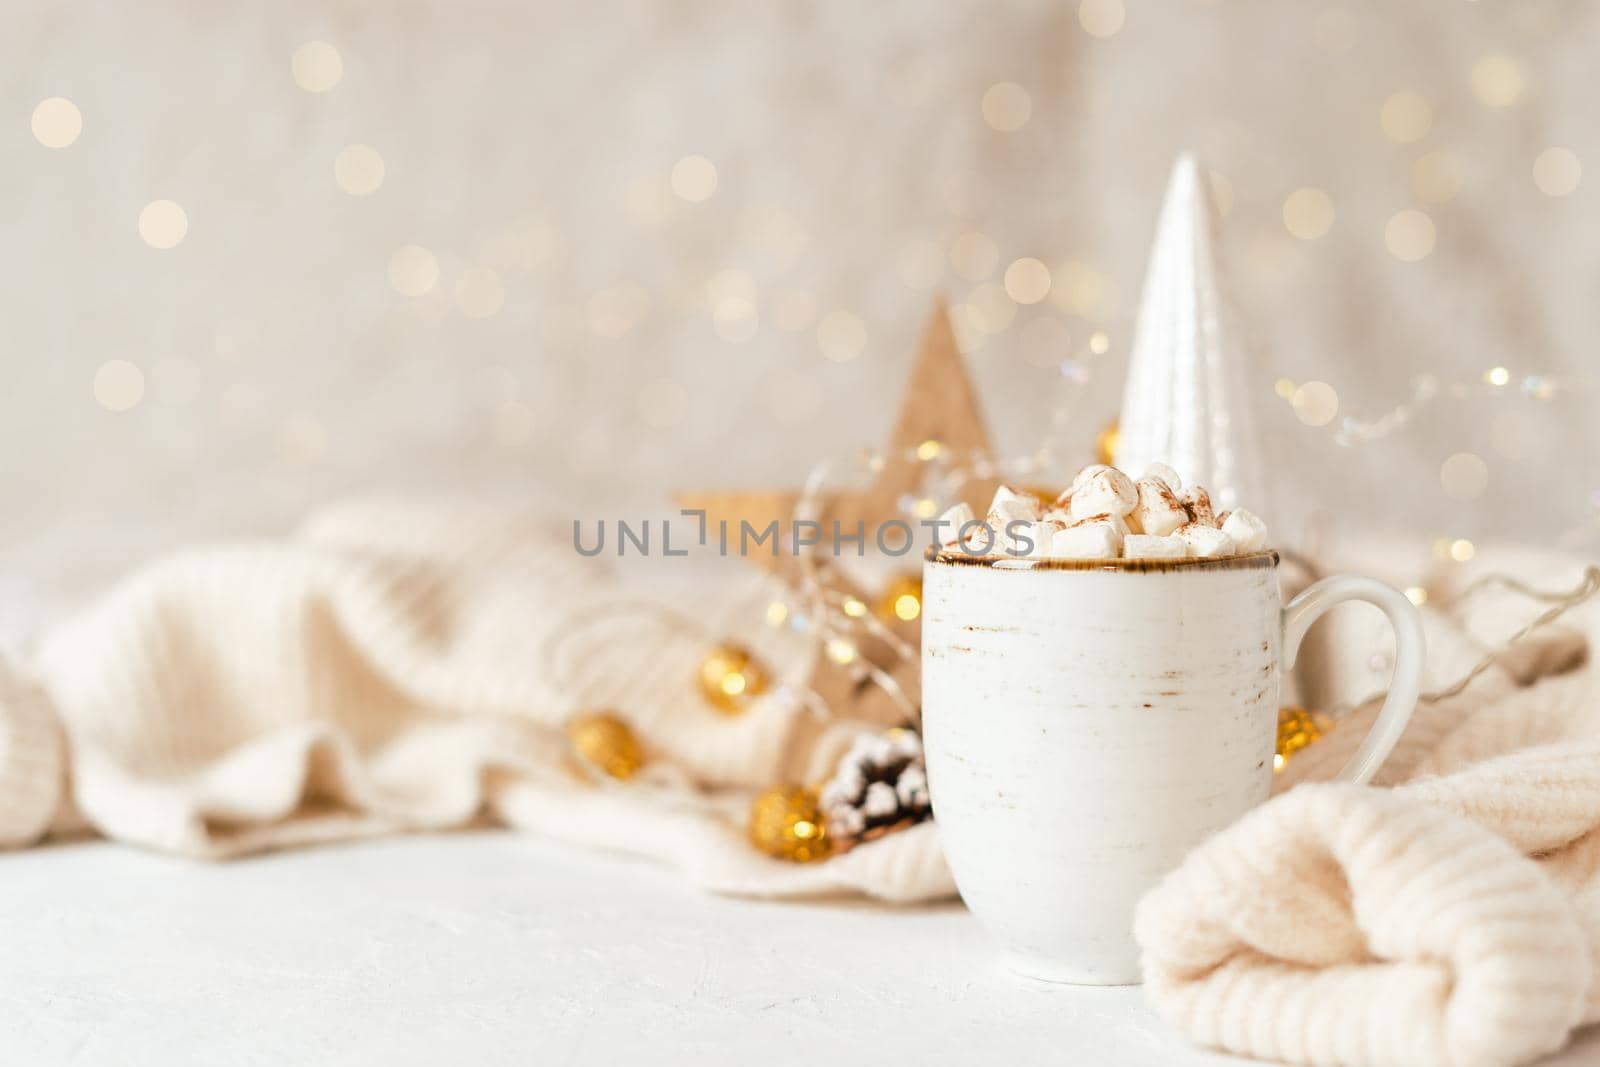 Details of Still life, cup of coffee with marshmallows, wooden eco natural decor, Christmas lights with sweater on white background, home decor in cozy house. Winter weekend concept with copy space